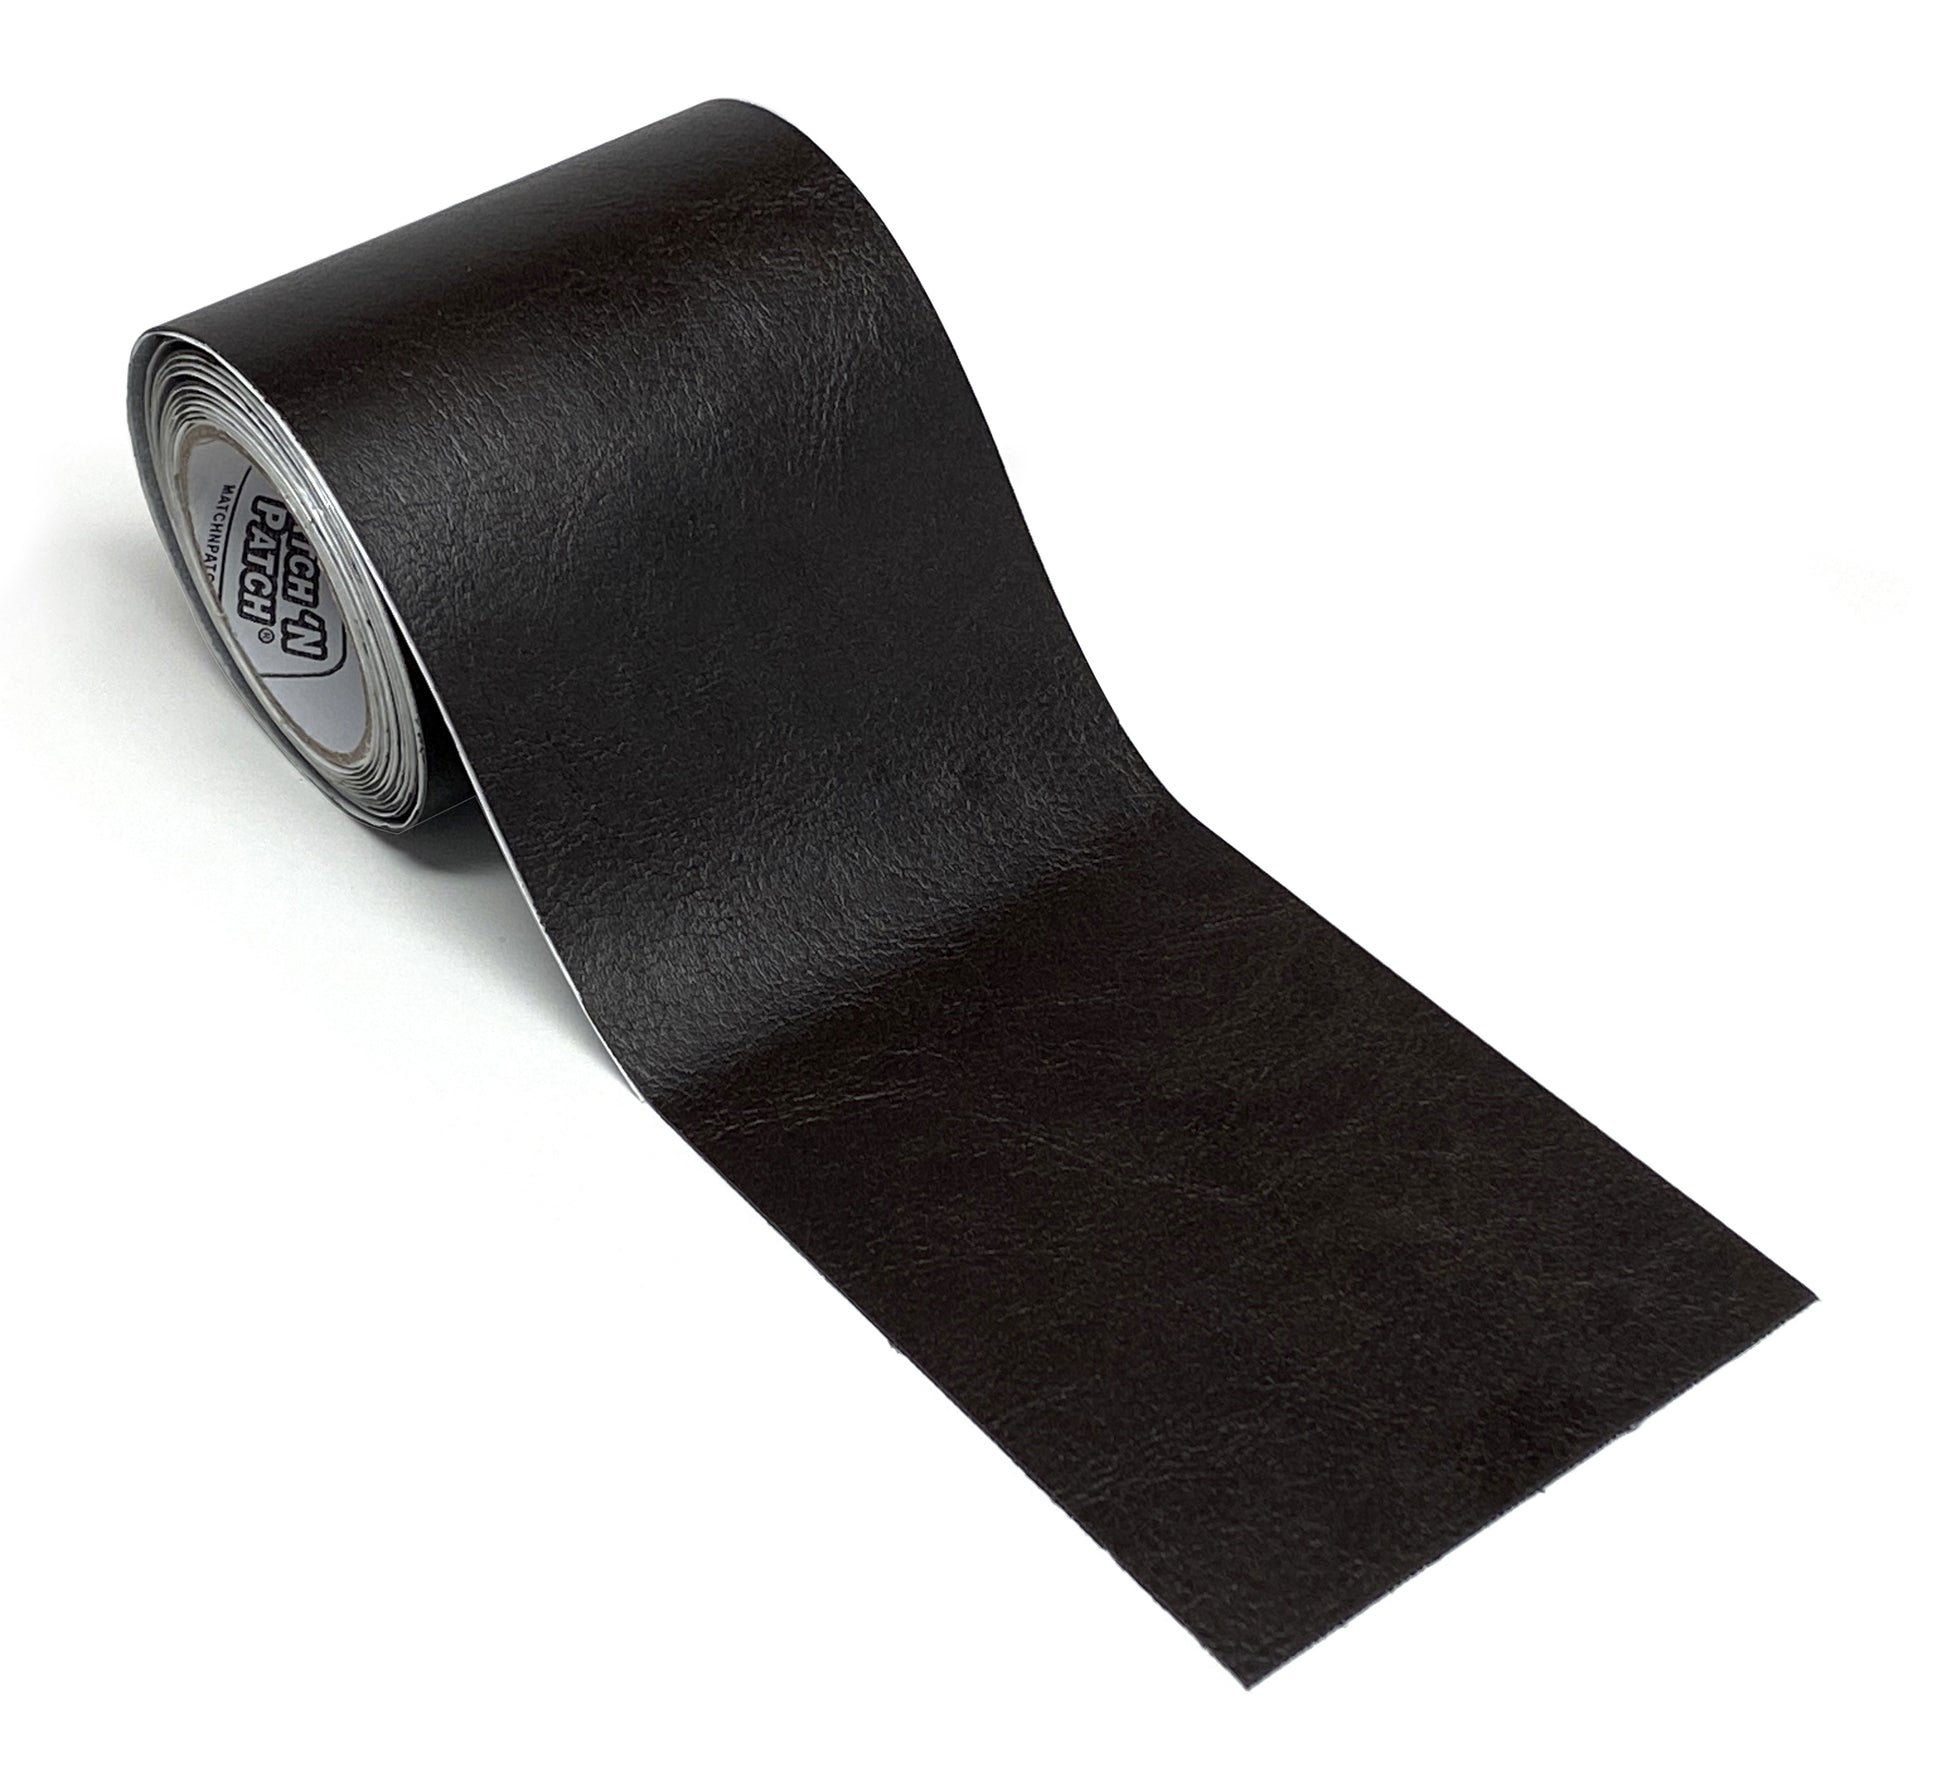 Match 'n Patch Self-Adhesive Leather Repair Tape, 3 inch x 72 inch (Black)